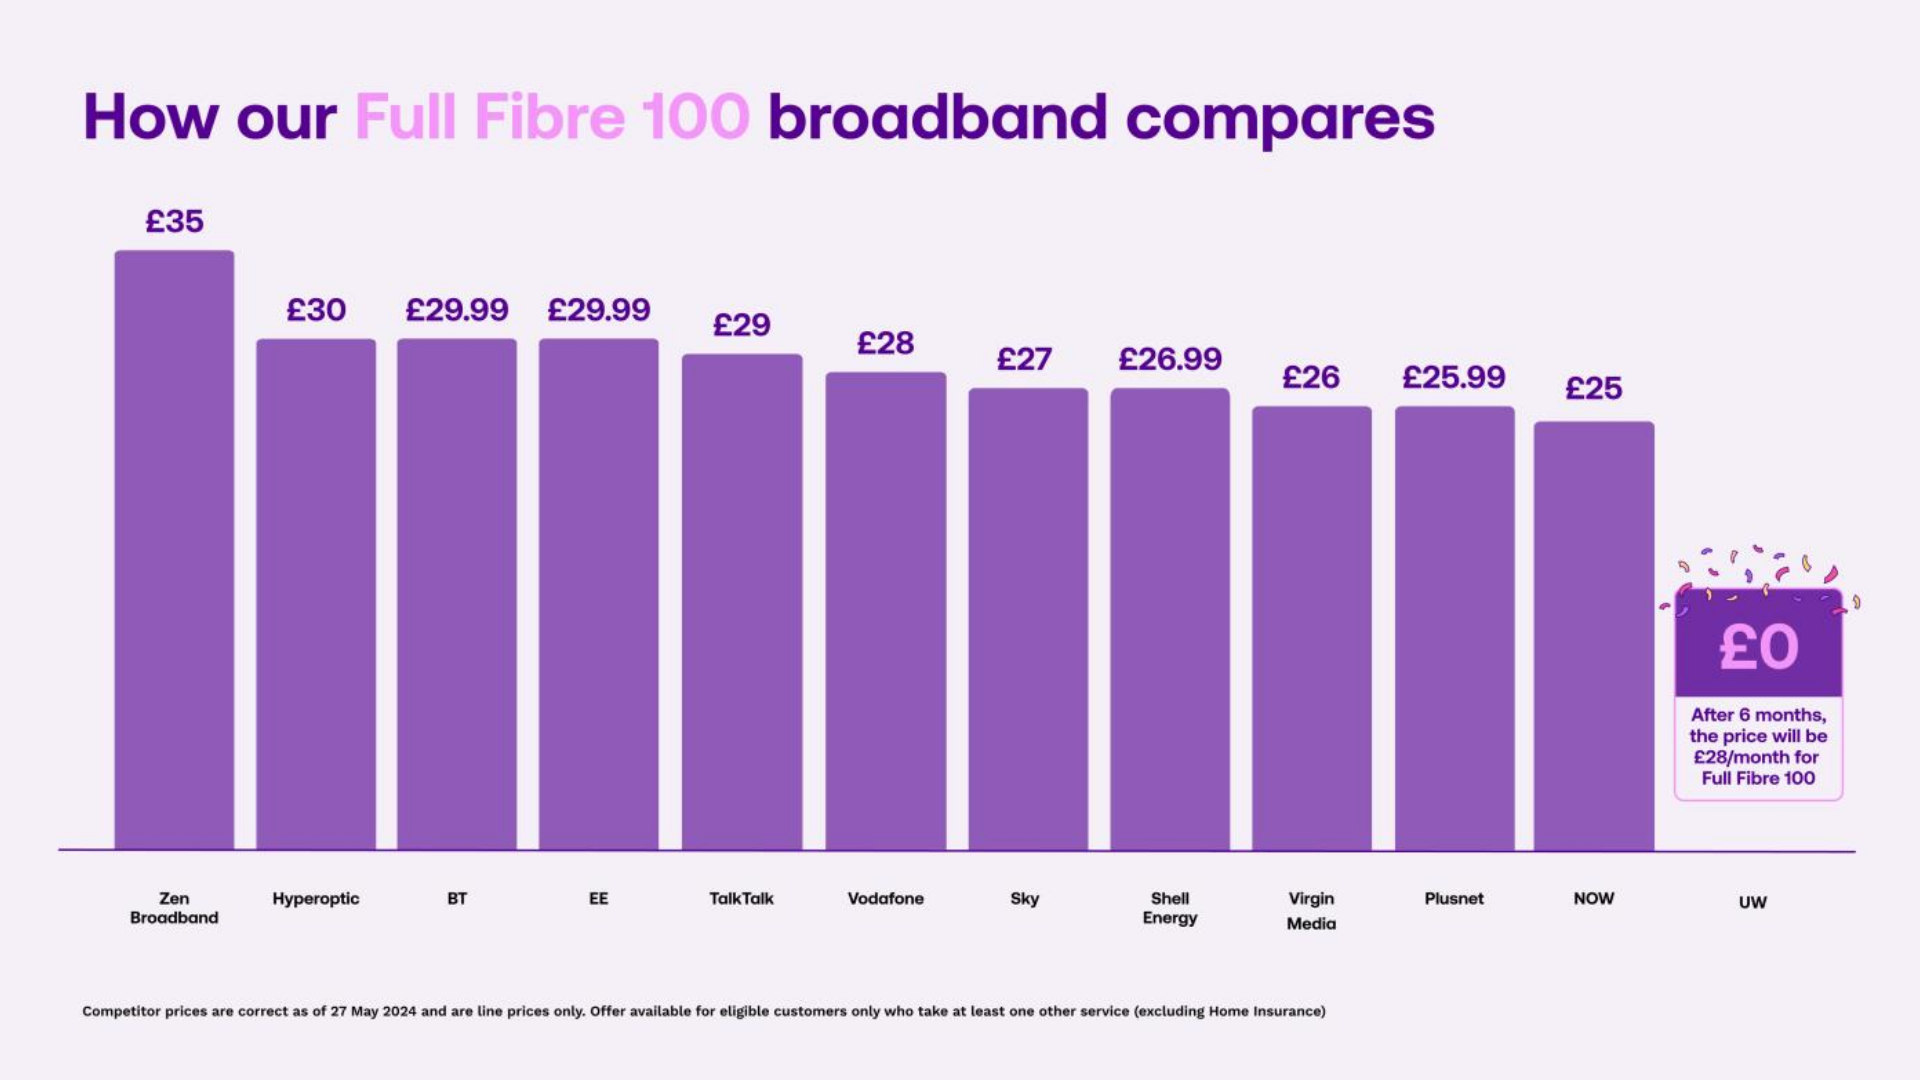 Six months free Full Fibre 100 broadband with Utility Warehouse